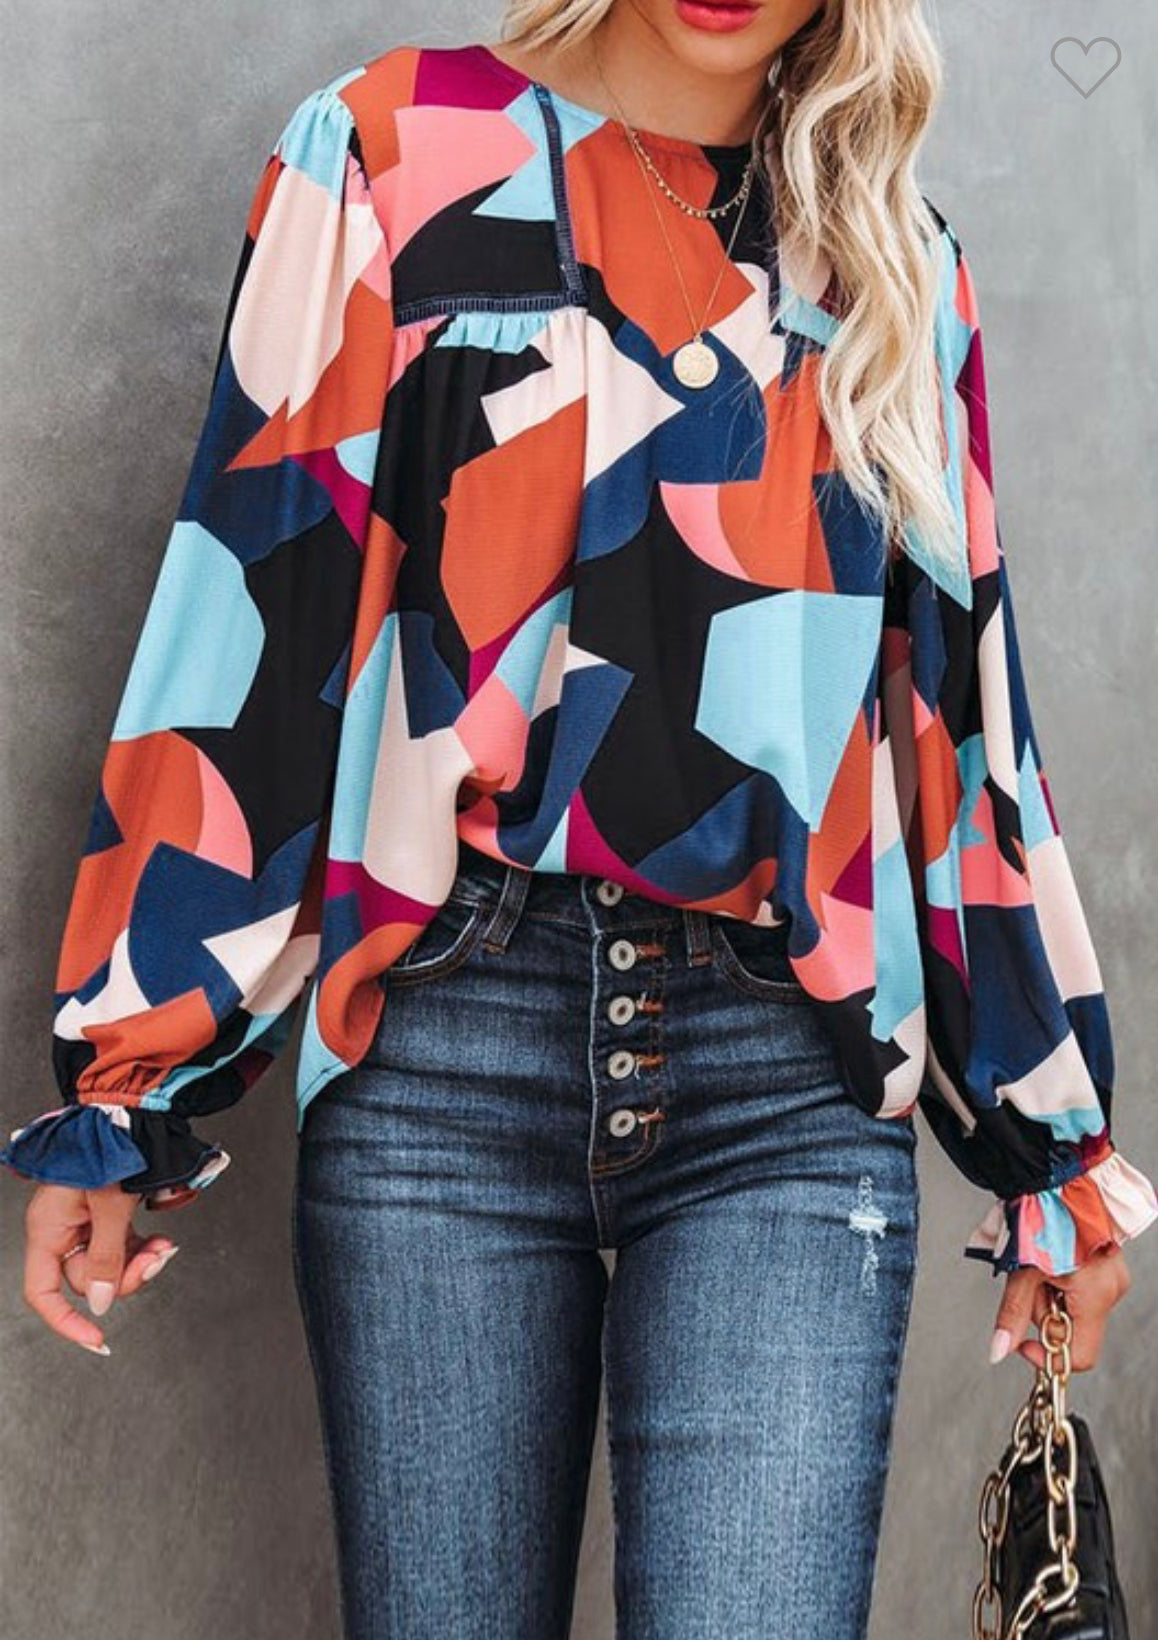 Pretty Patterned Blouse